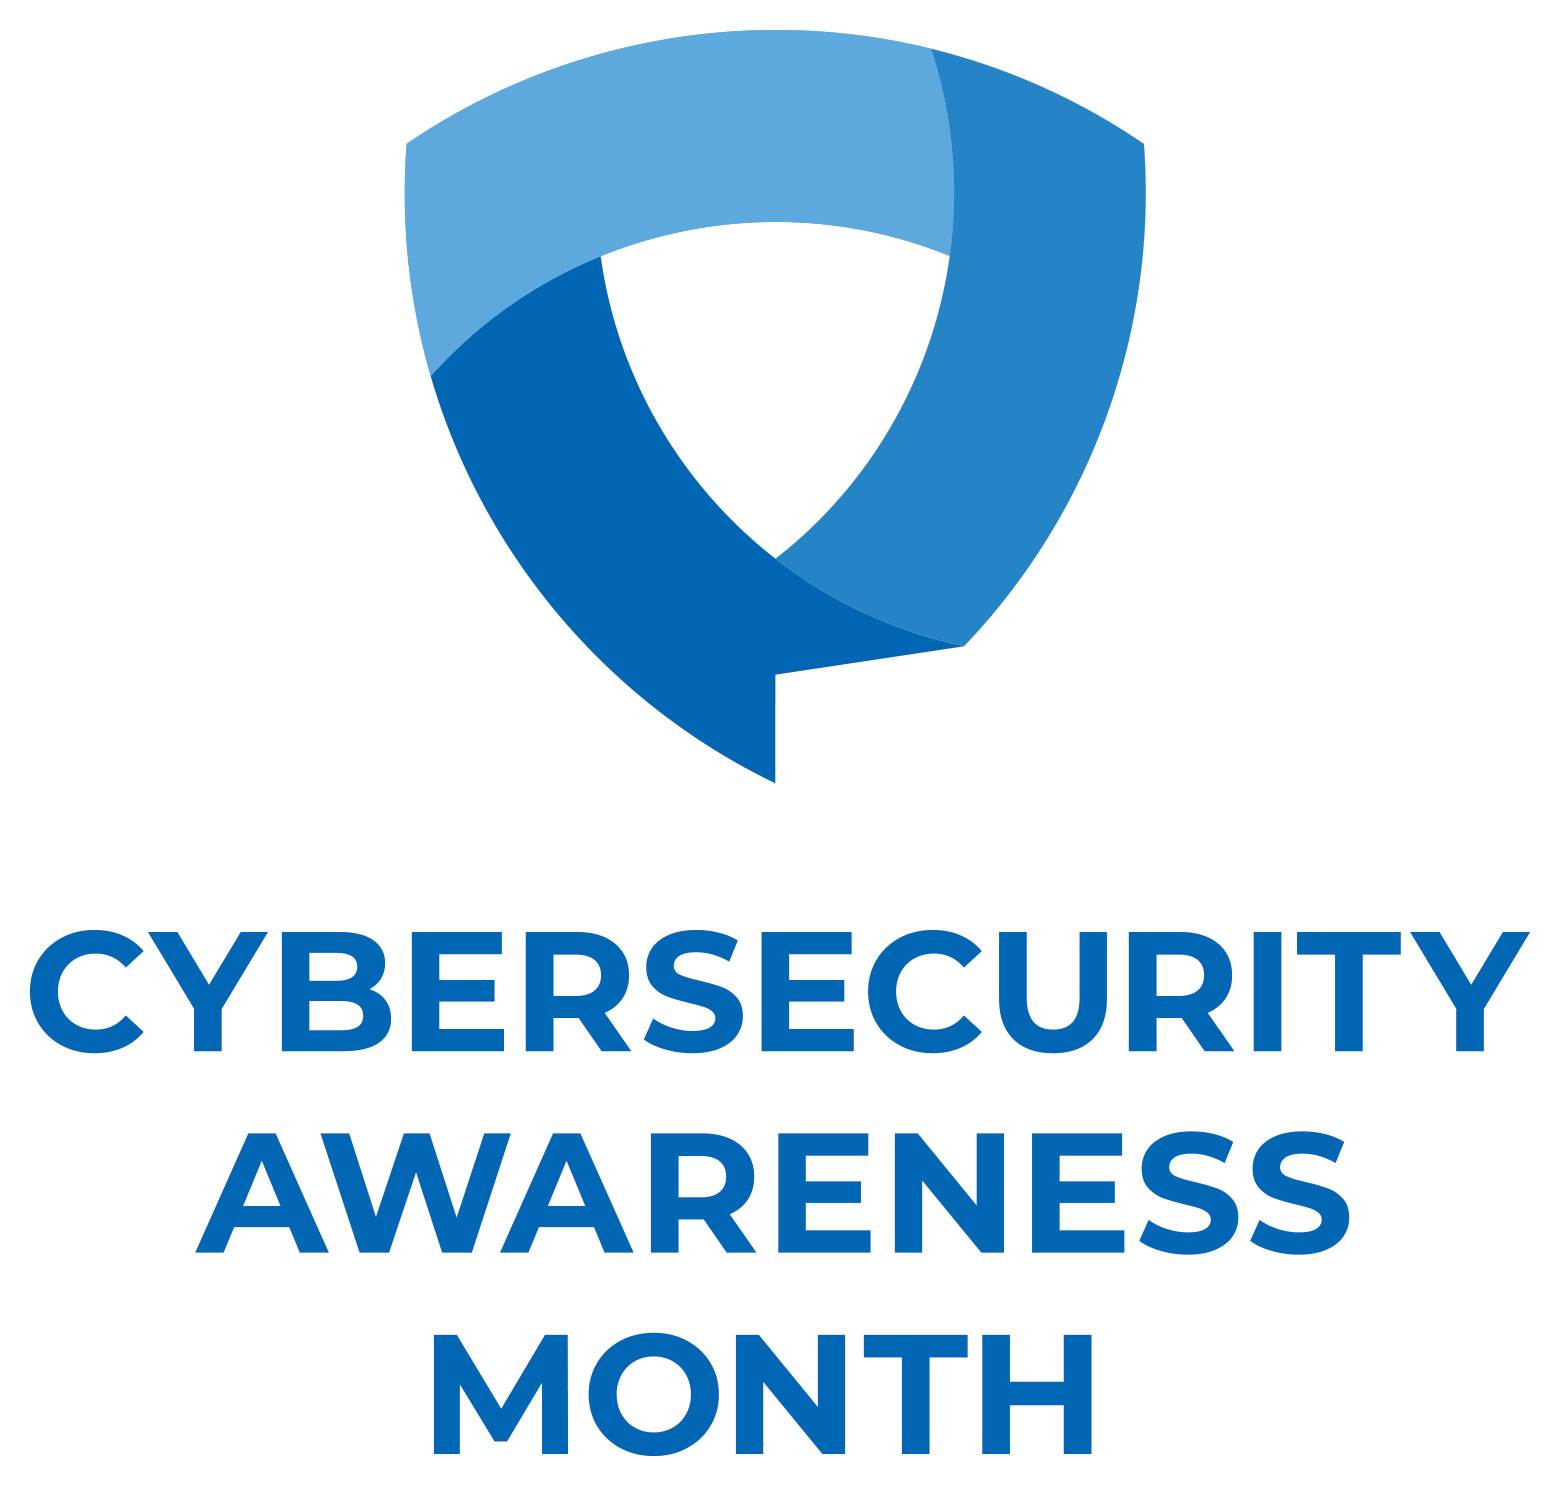 Viakoo is proud to be a Champion of this year’s Cybersecurity Awareness Month, a global effort recognized each October to promote the awareness of cyber safety and privacy.